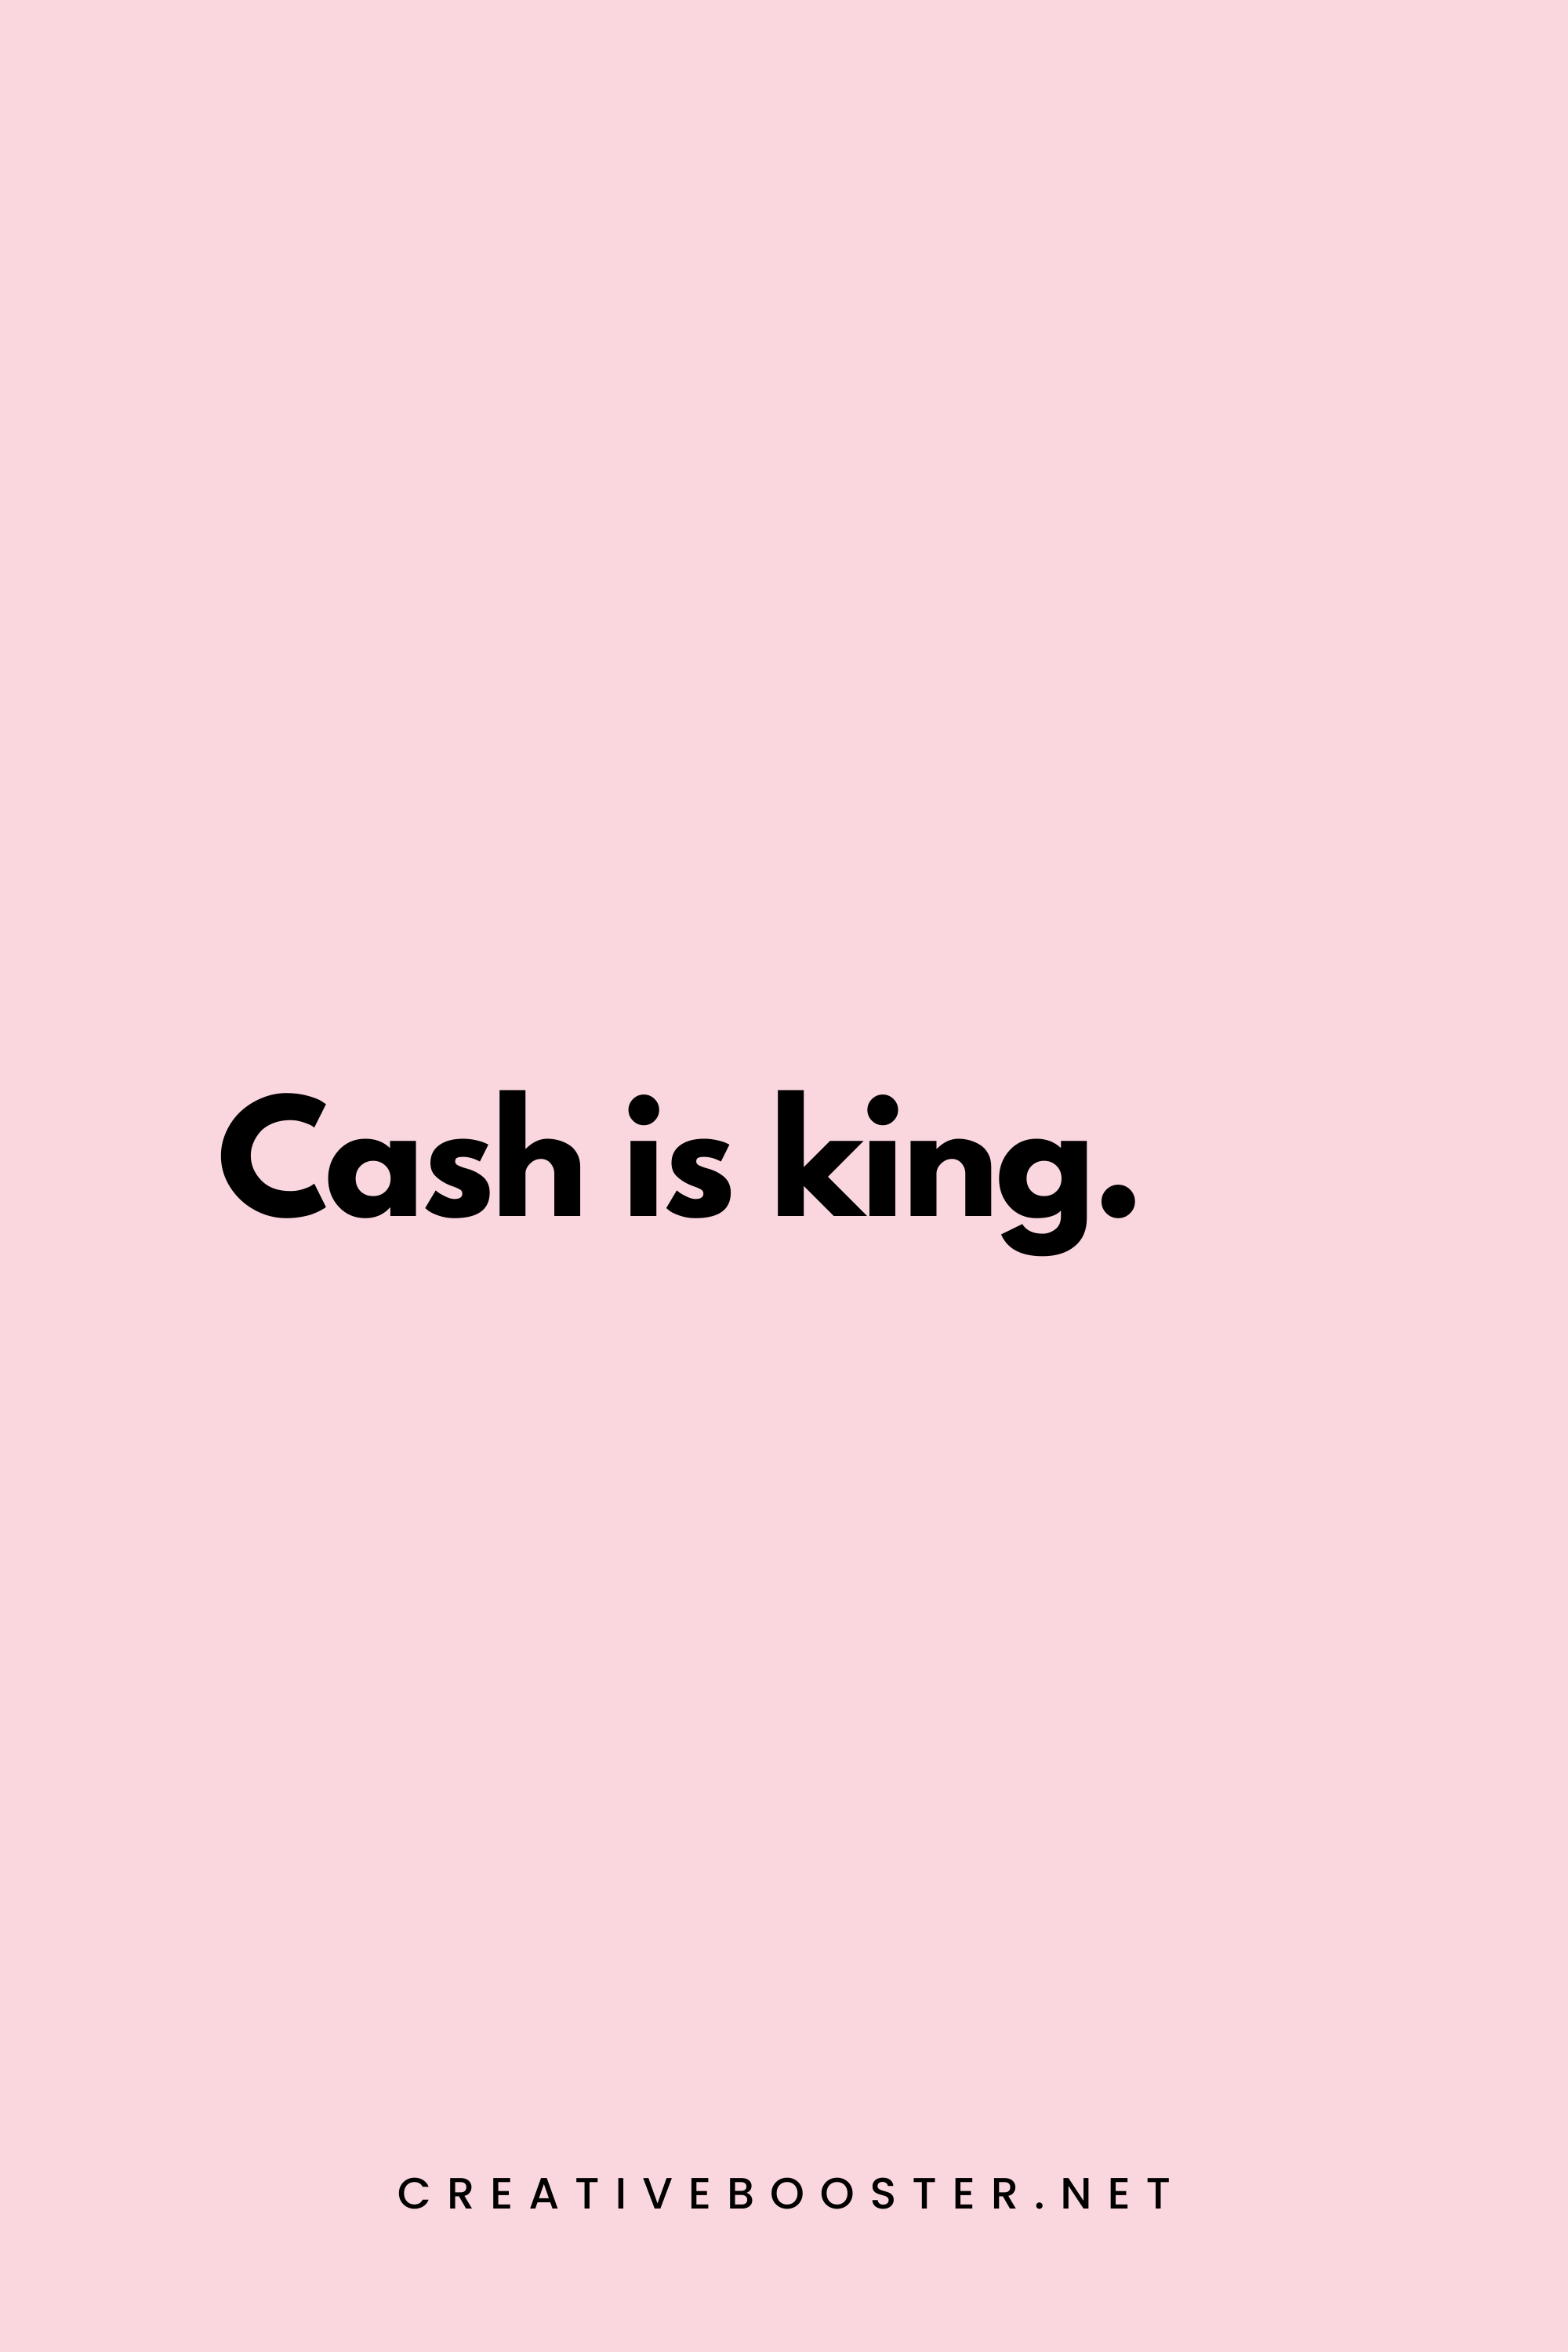 24. Cash is king. - Unknown - 2. Short Financial Freedom Quotes